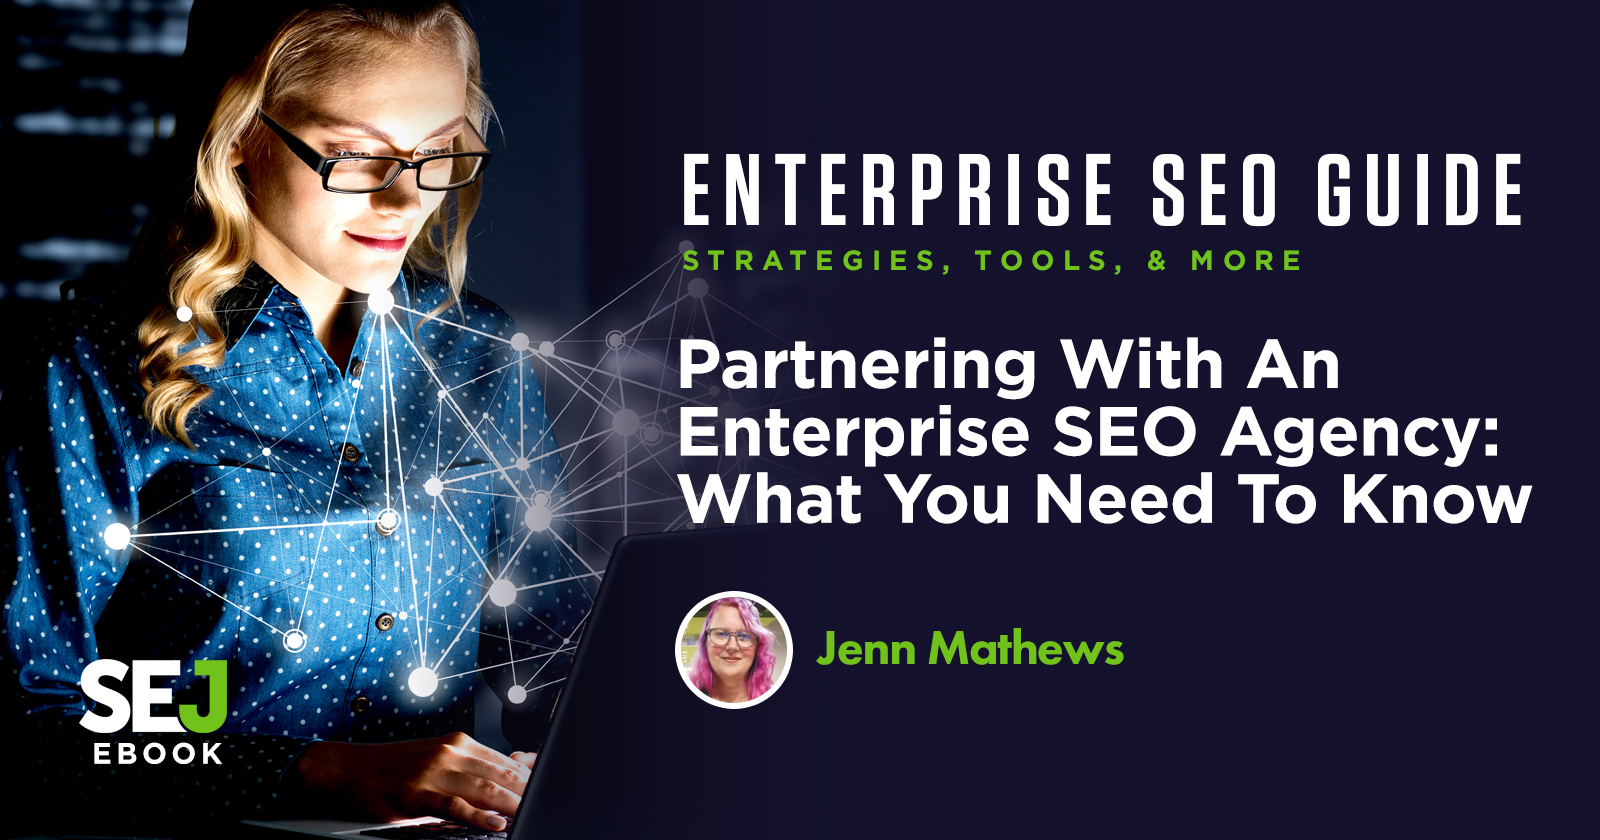 Partnering with an Enterprise SEO Agency - What You Need to Know